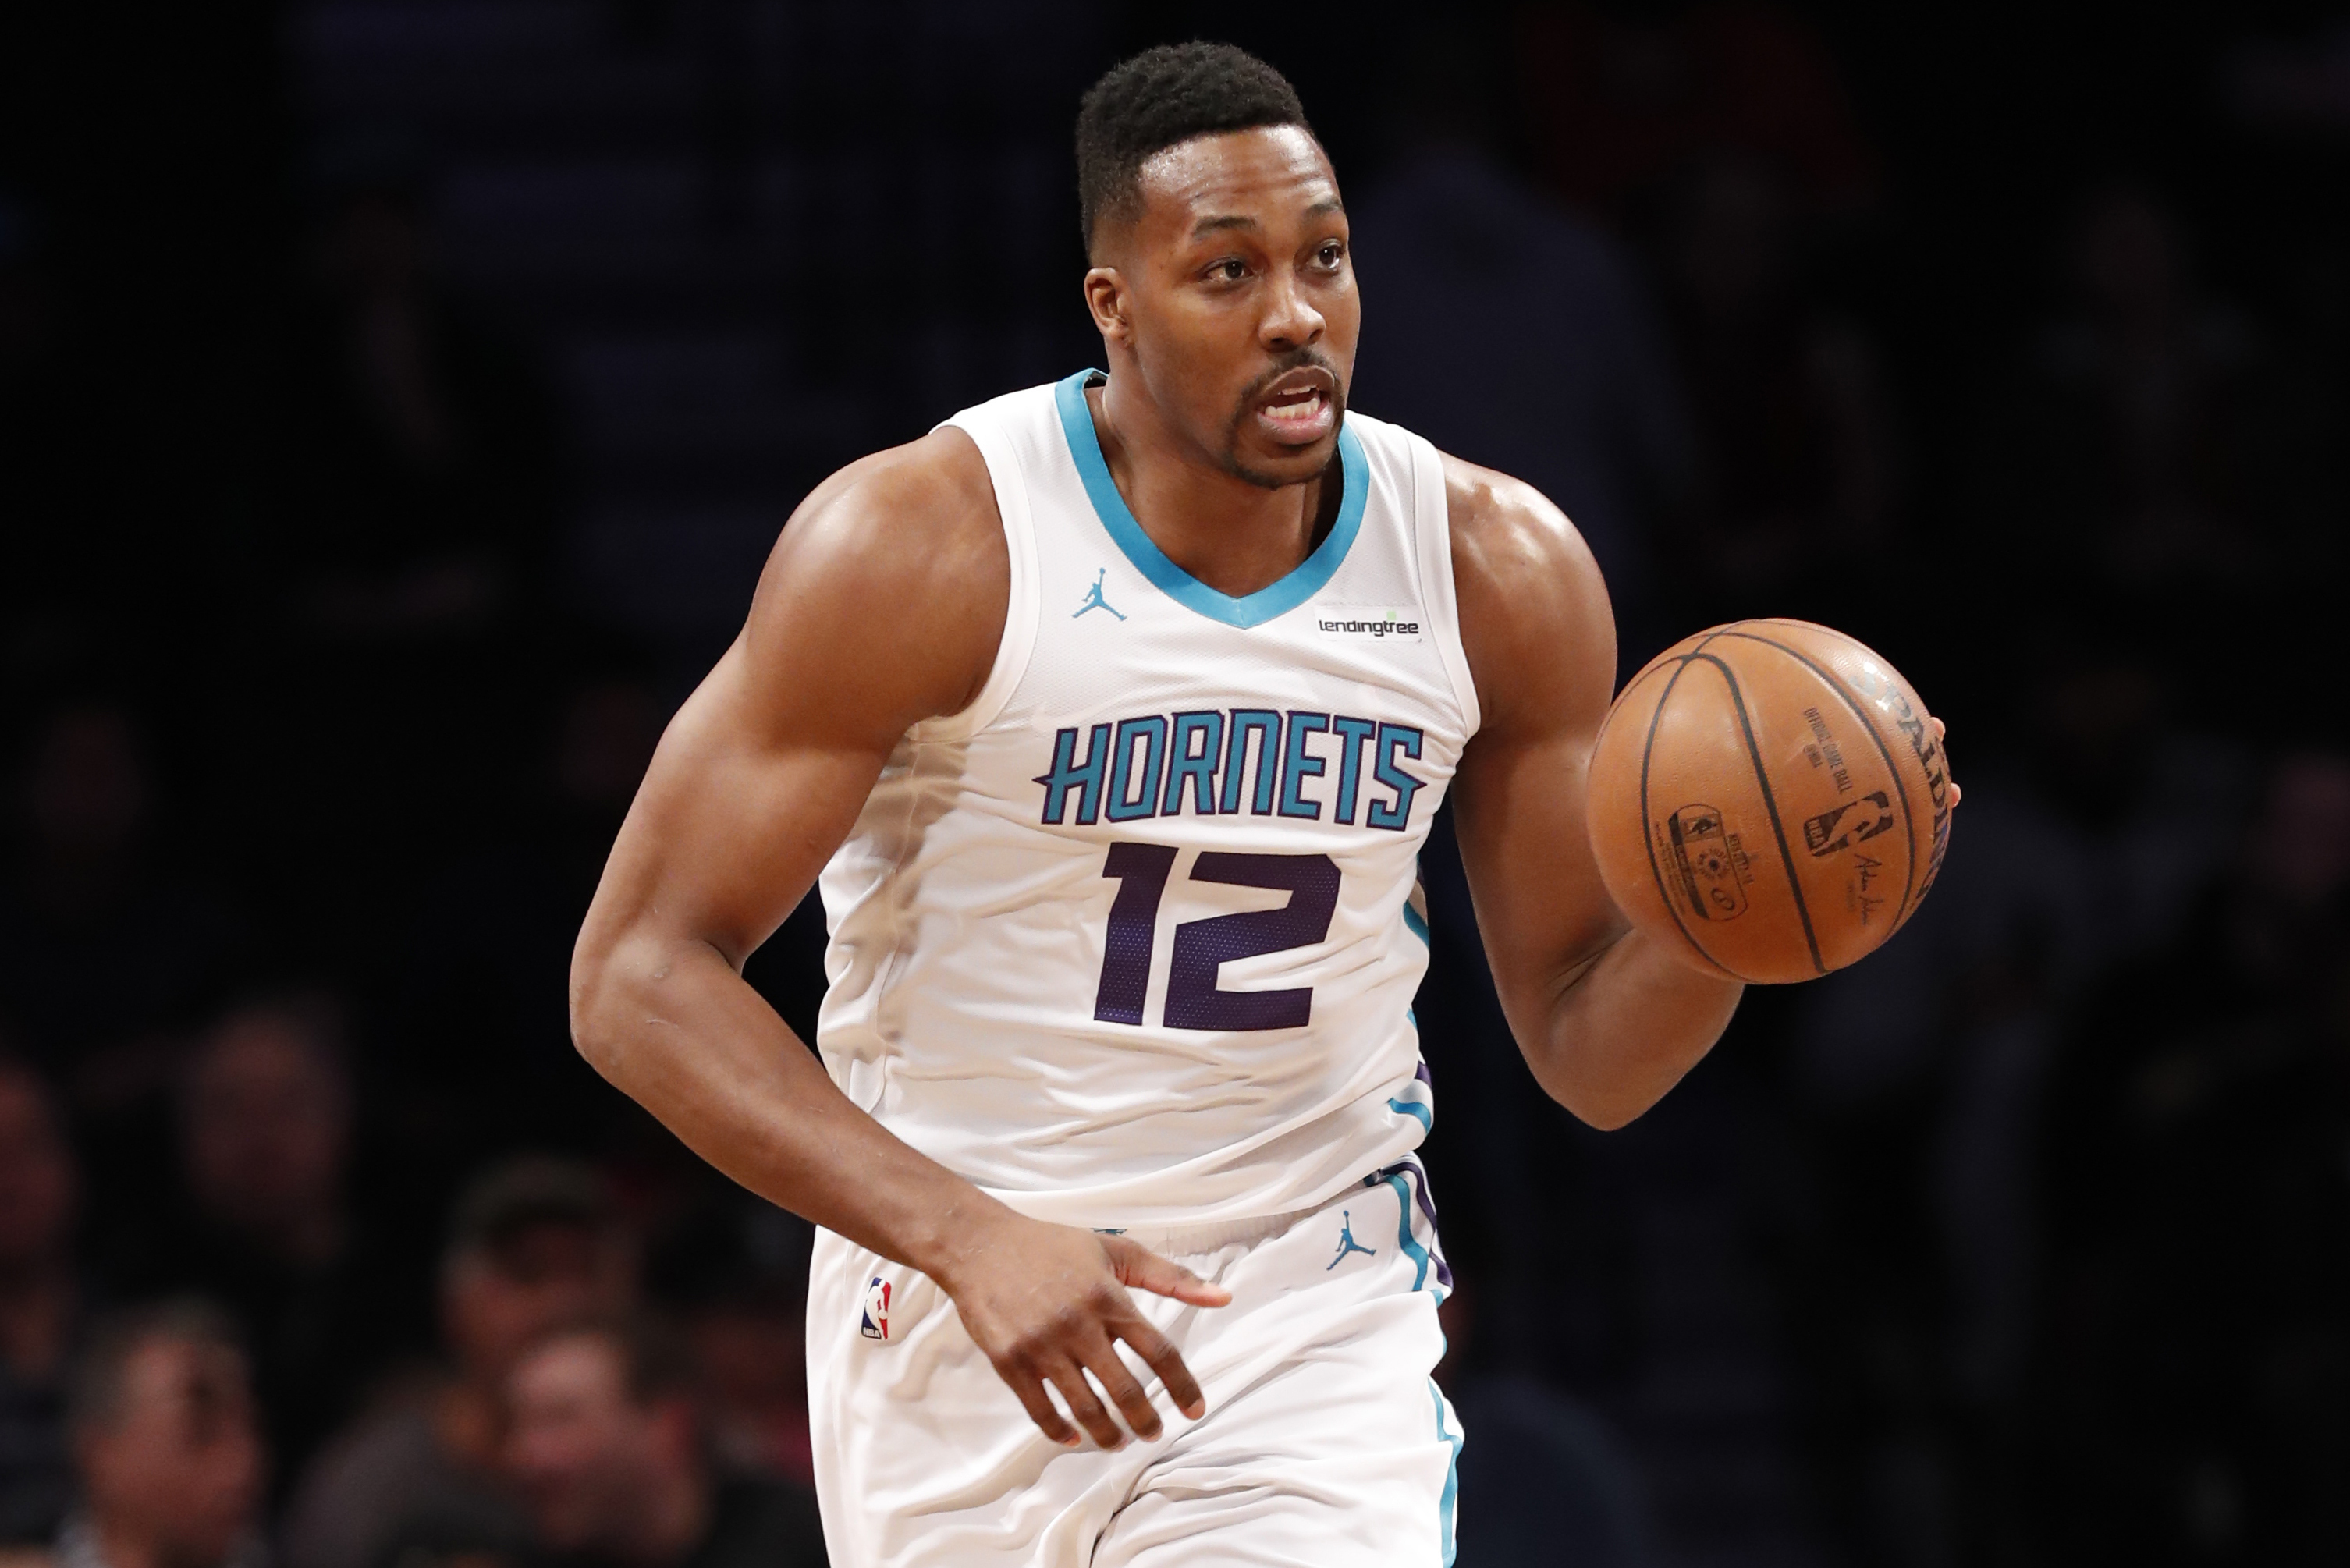 Dwight Howard finds a new energy in Charlotte